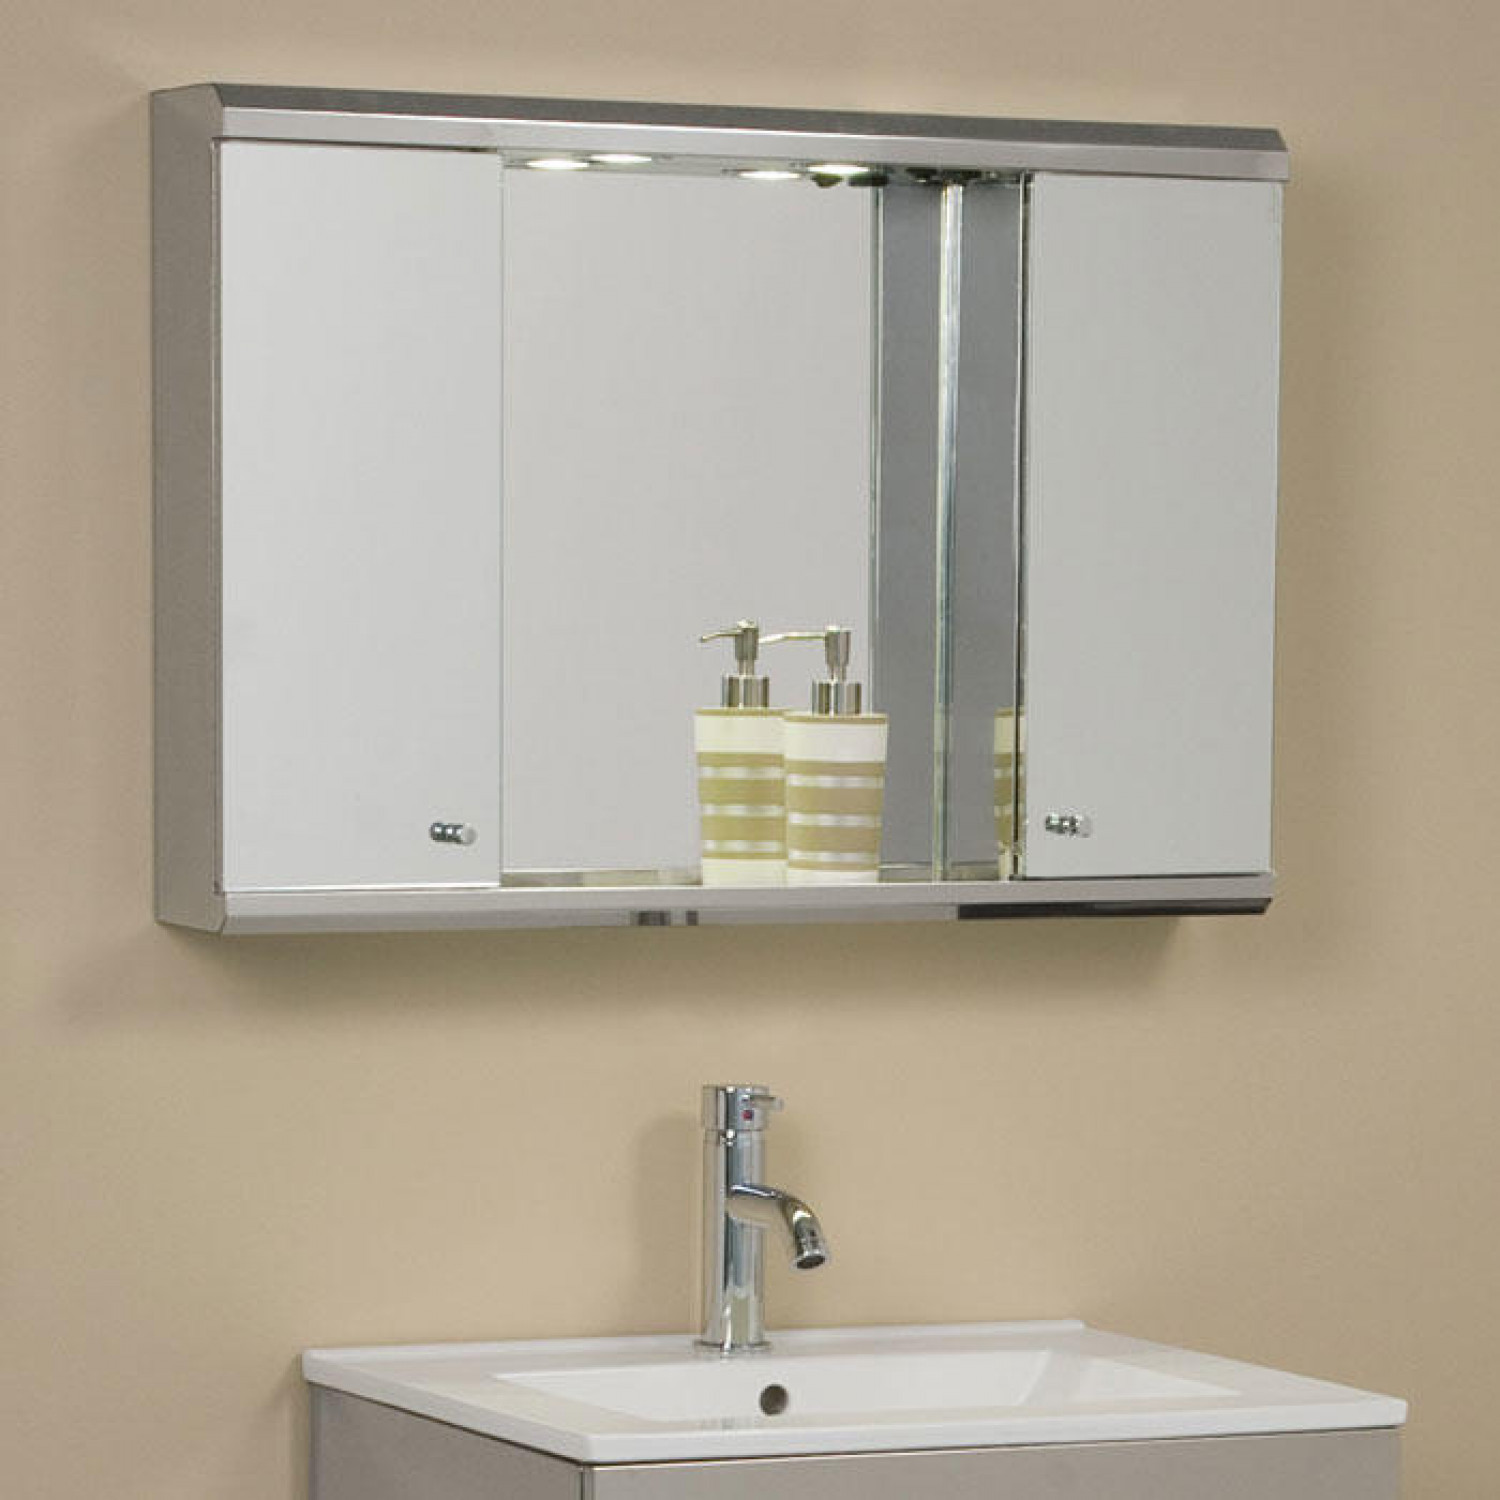 Bathroom Mirror Cabinet With Light
 Illumine Dual Stainless Steel Medicine Cabinet with